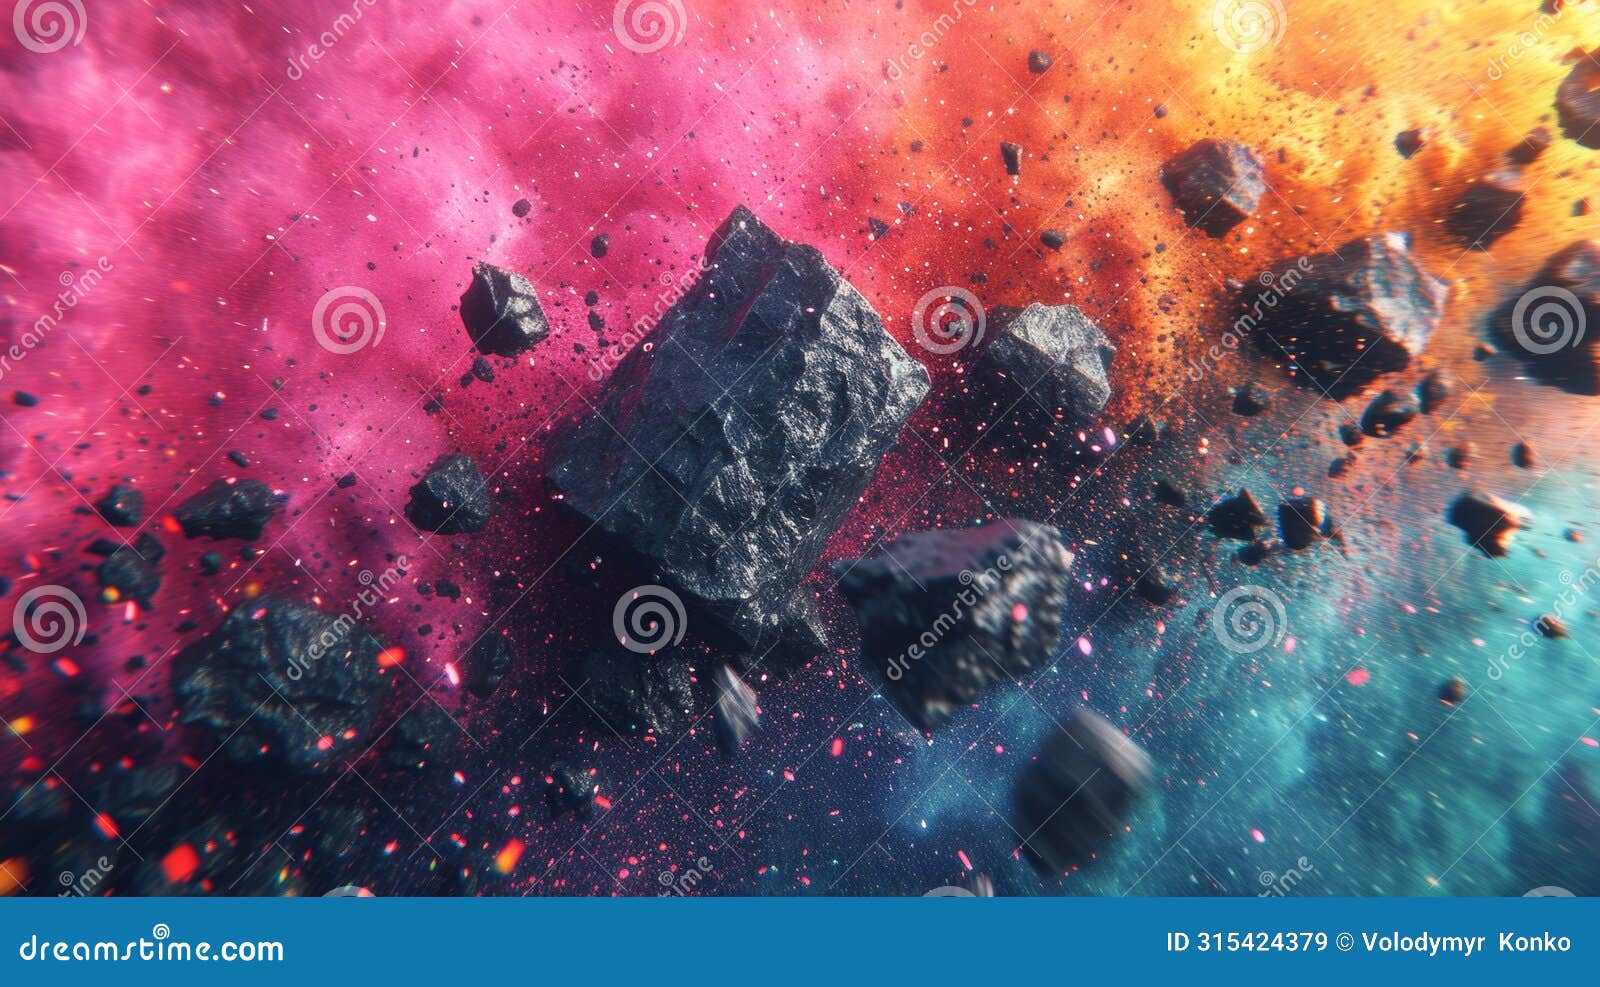 abstract meteorites in colorful space nebula